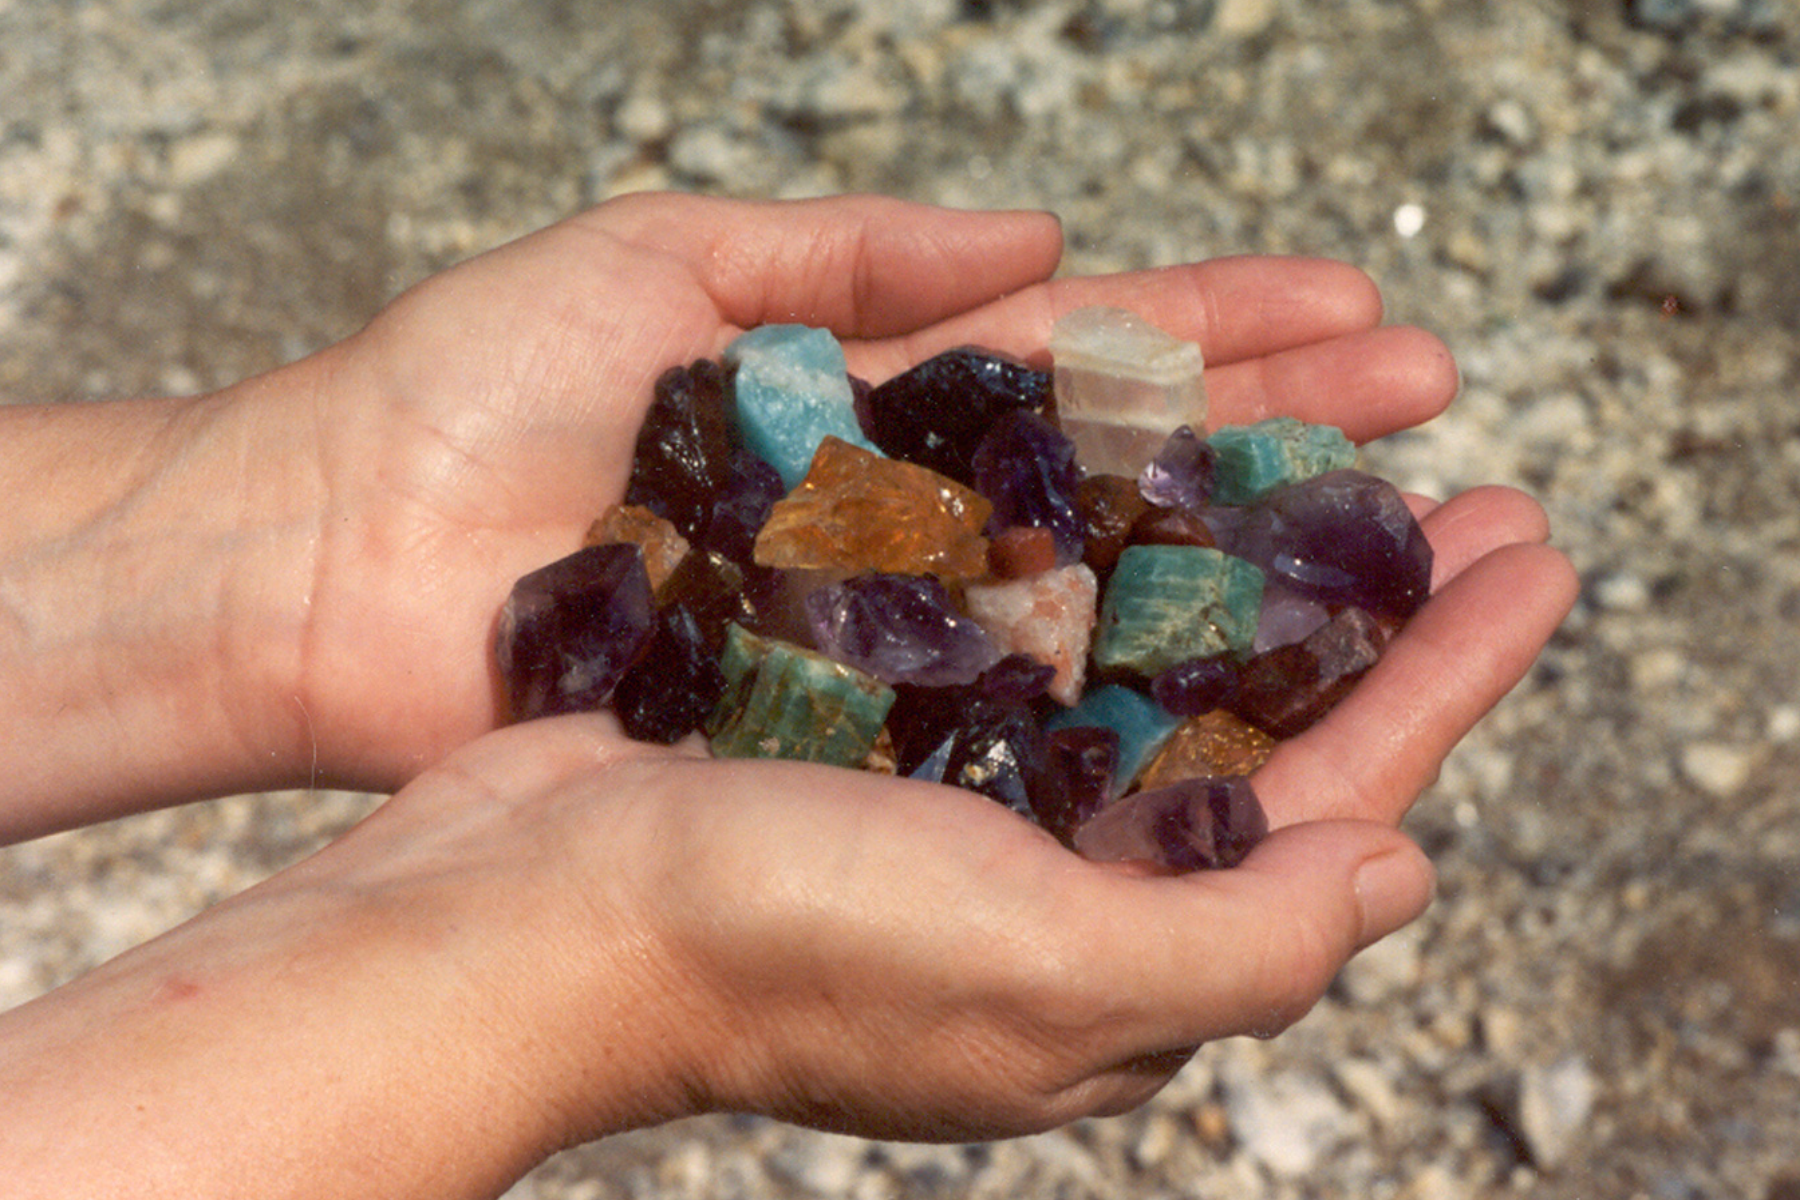 A person's hand holding a large quantity of gemstones on a mining site